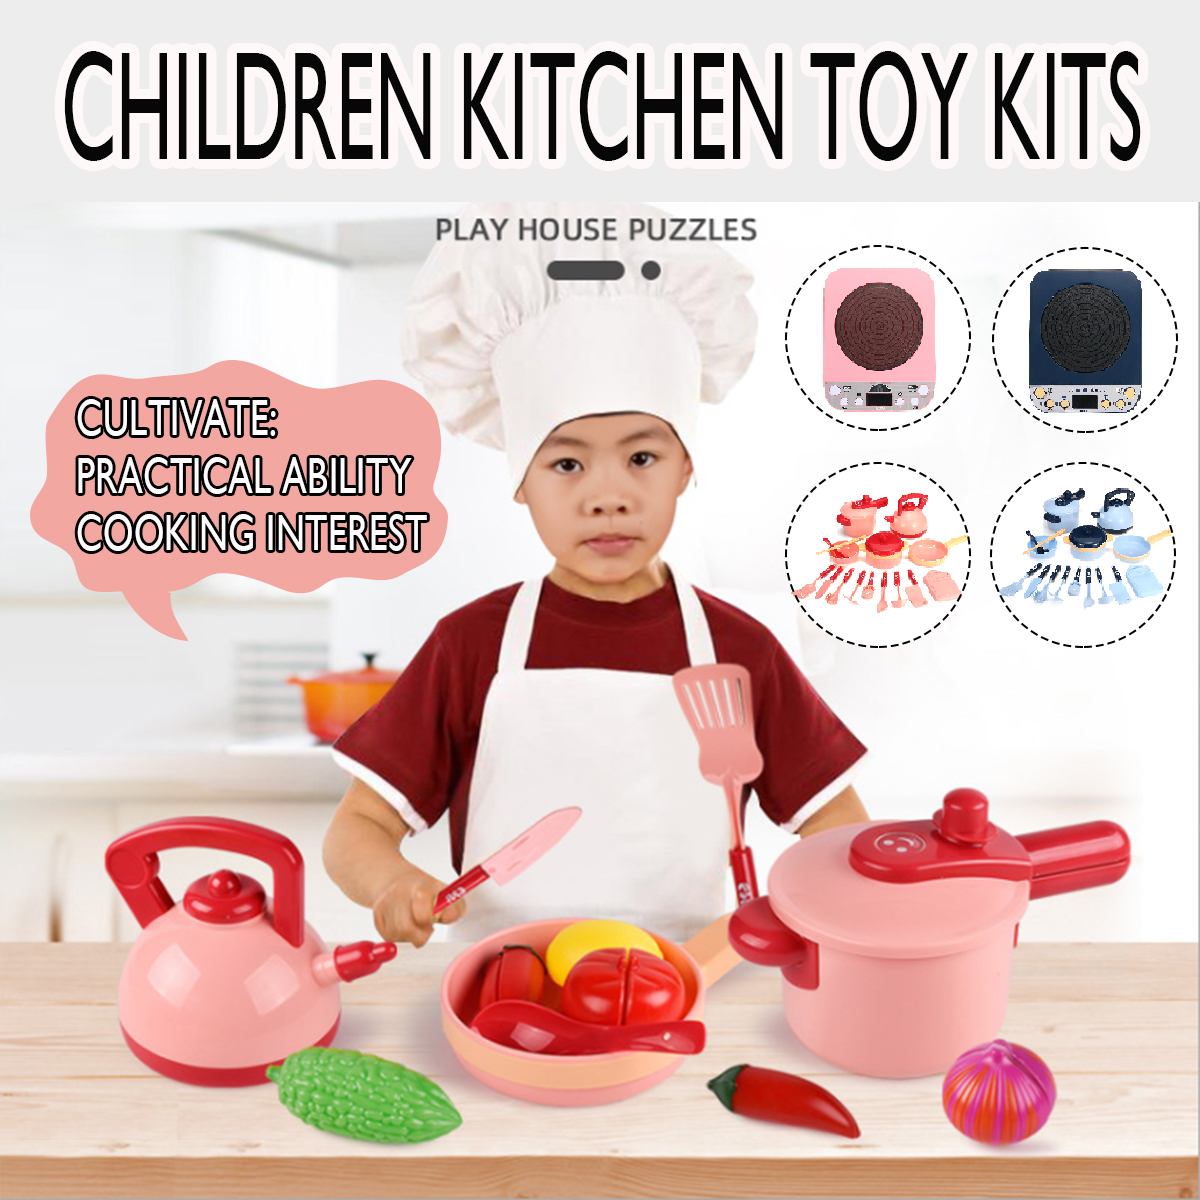 16Pcs-Simulation-Kitchen-Cooking-Play-Role-playing-Set-Toys-Practical-Skills-for-Children-Gift-1691330-1